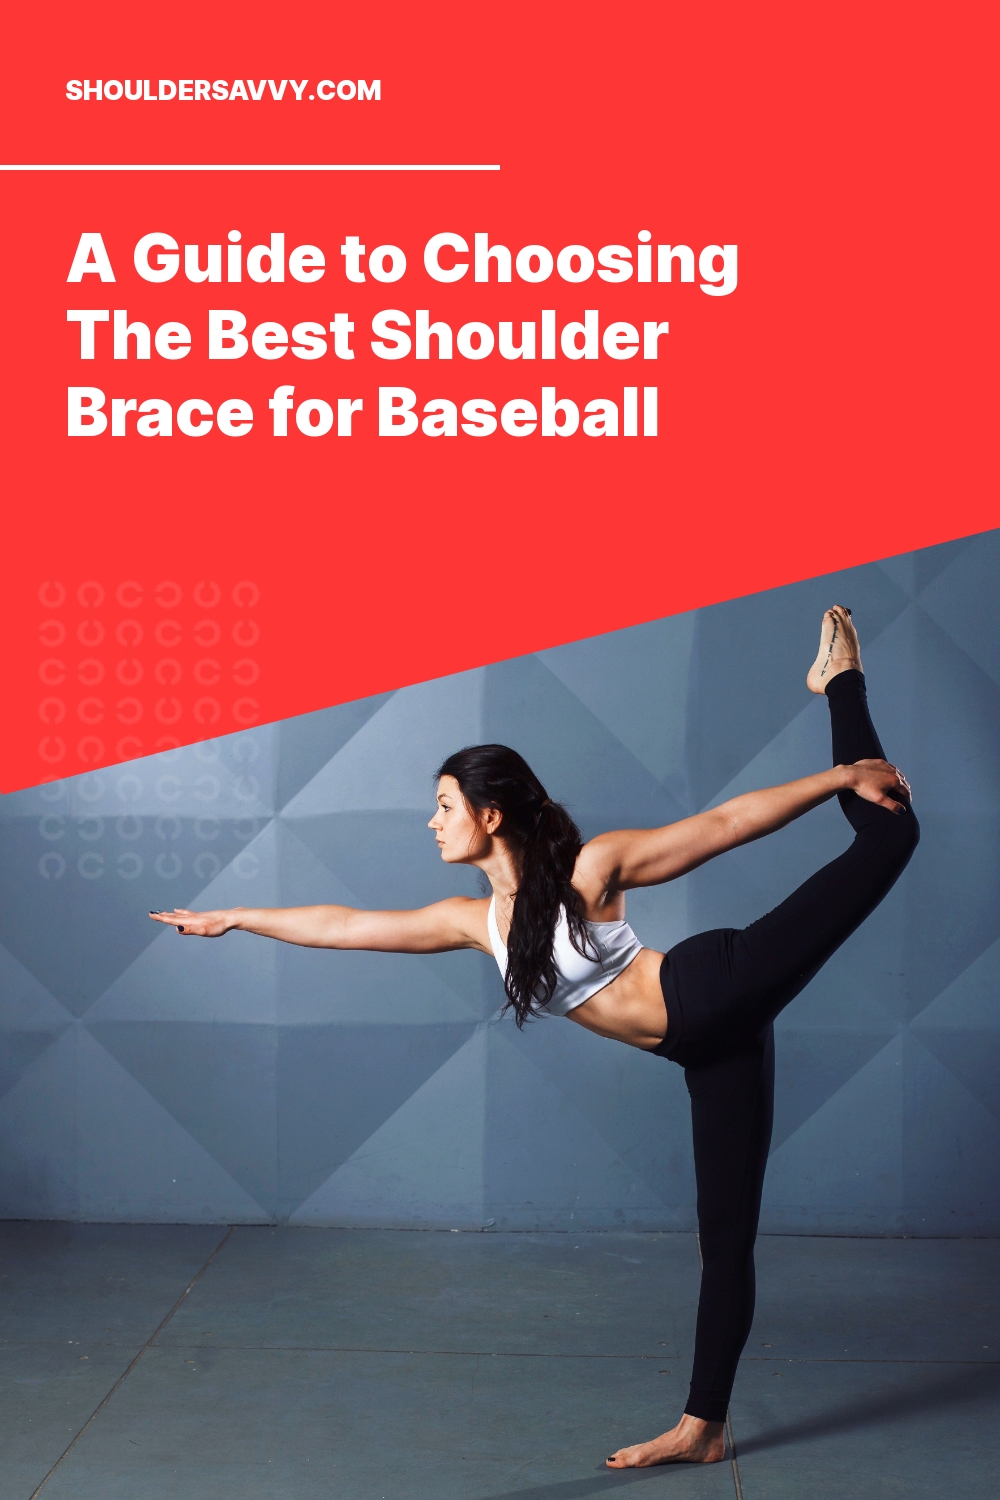 A Guide to Choosing The Best Shoulder Brace for Baseball